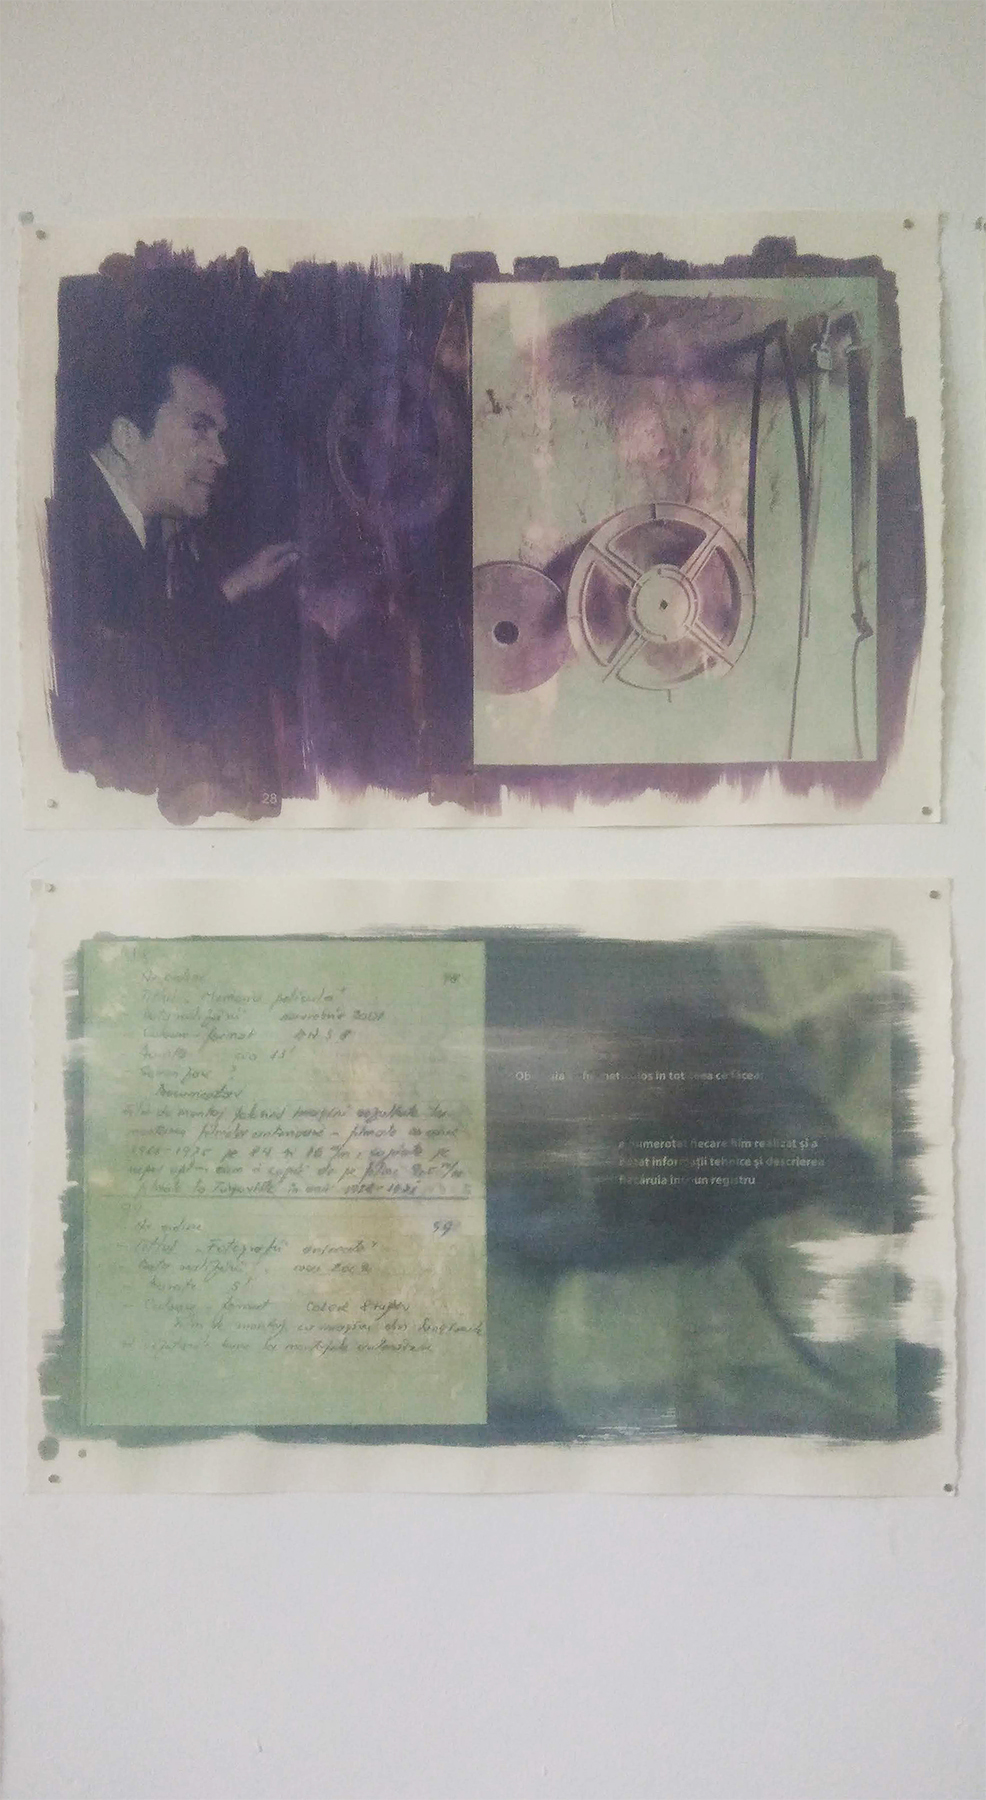 Urme de ieri- Master's degree project exhibition <br> manually printed book spreads, made using photosensitive paint